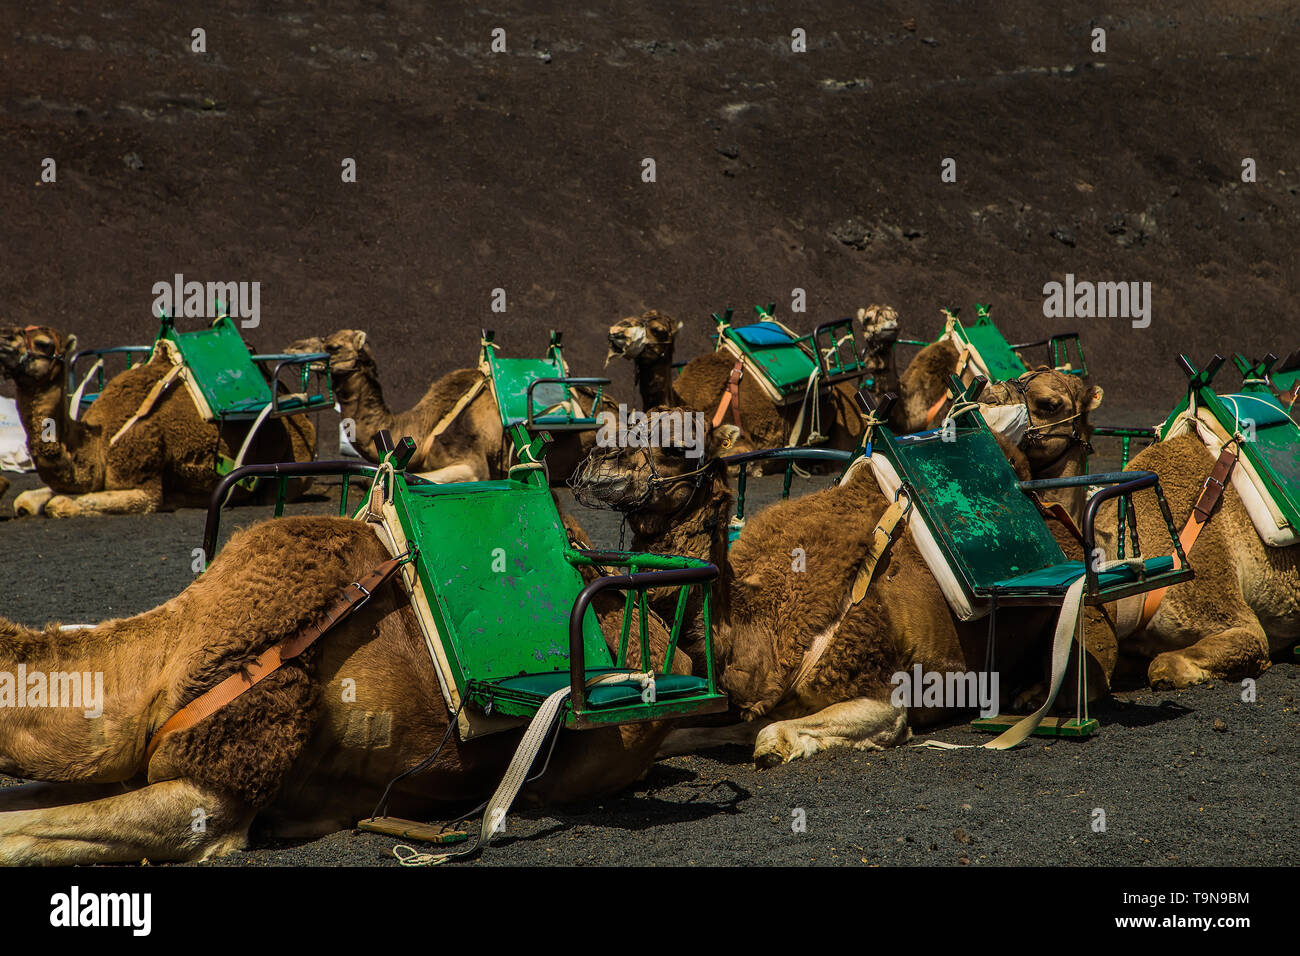 smal caravan of camels resting in the desert on the bown sand in sunny day Stock Photo